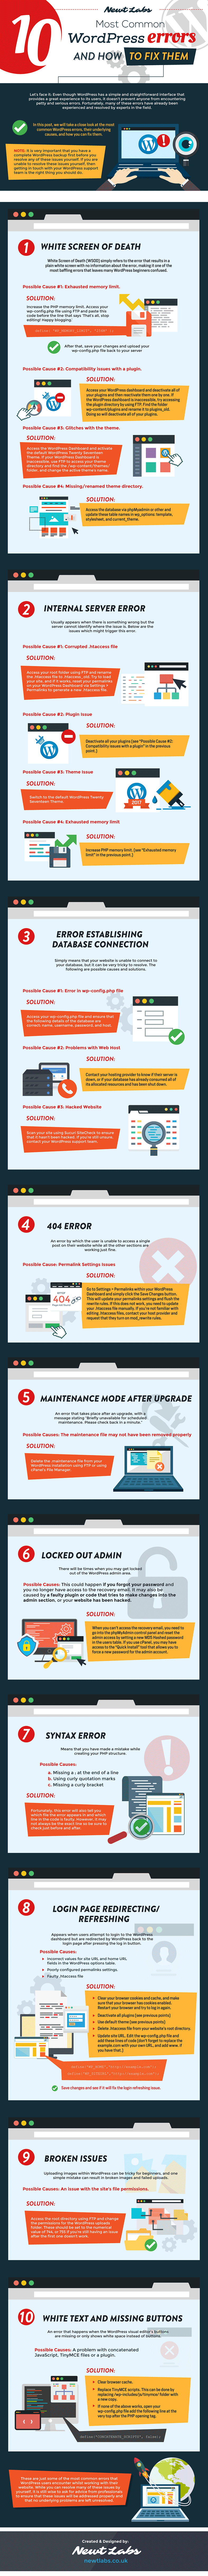 10 Most Common WordPress Errors and How to Fix Them (Infographic)